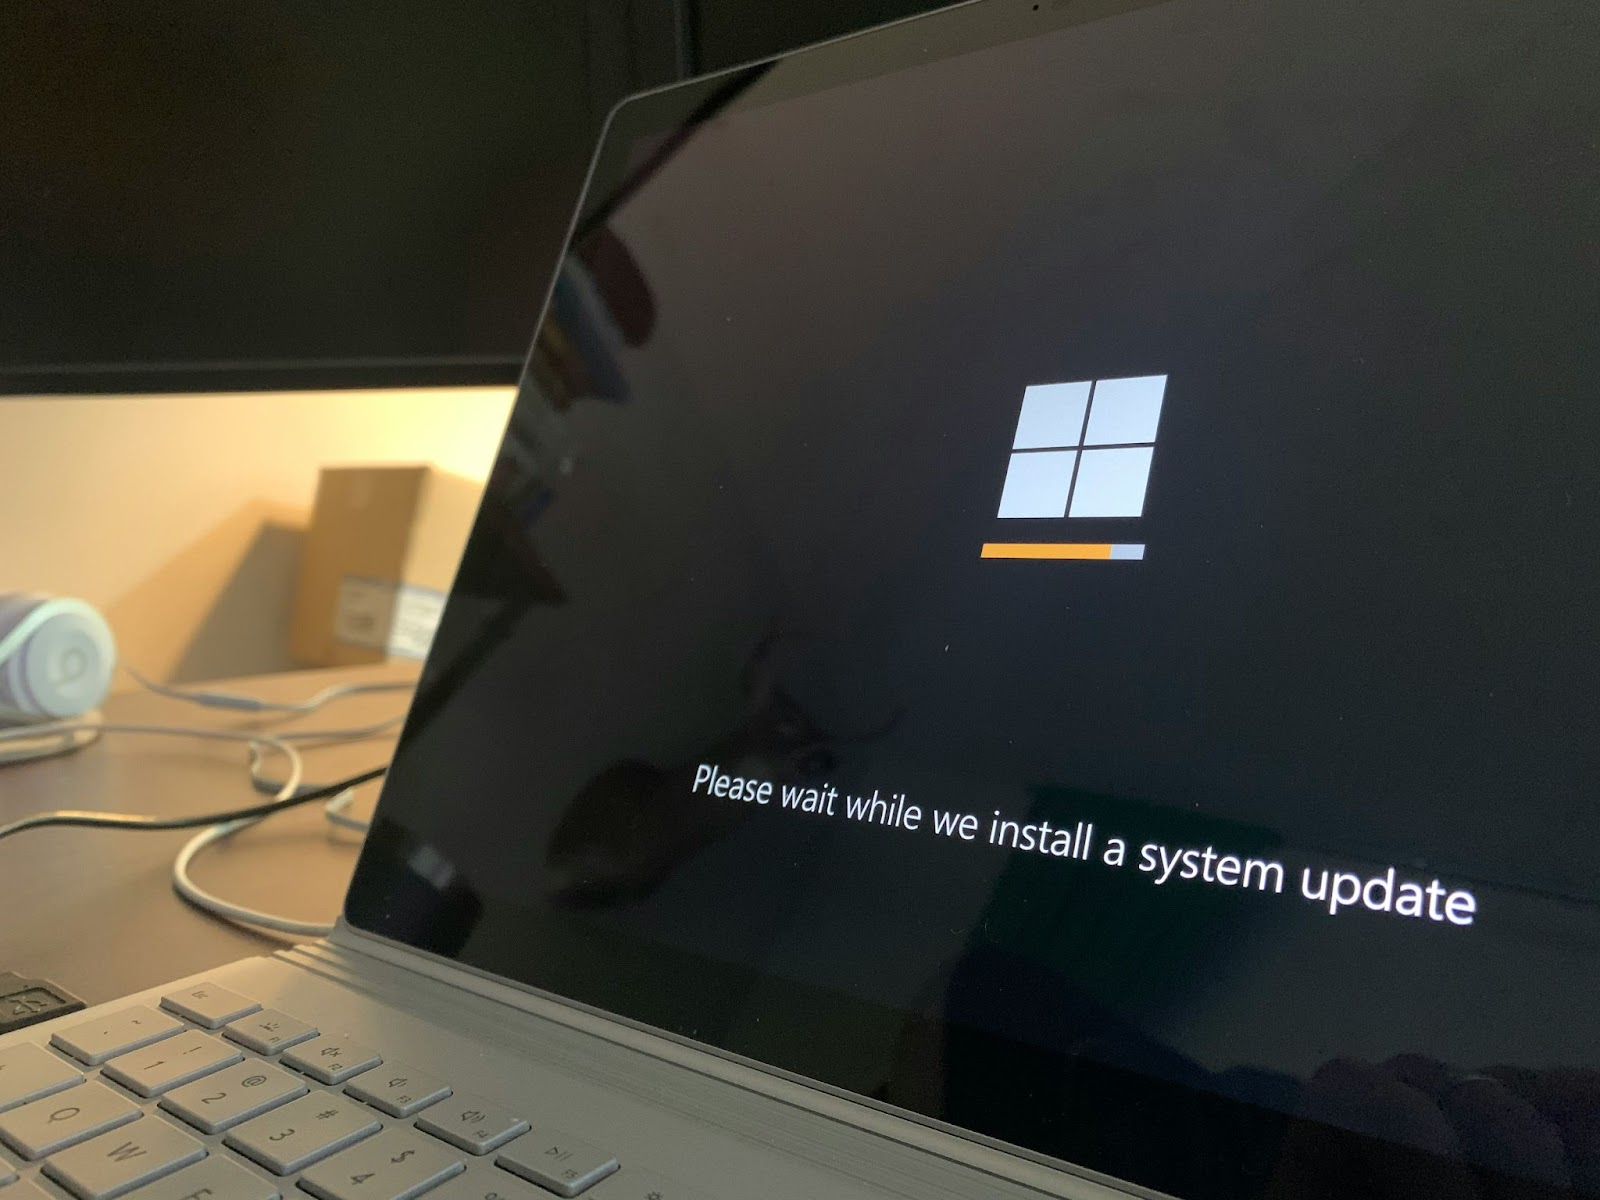 A laptop screen displaying an operating system update progress with the message "Please wait while we install a system update."